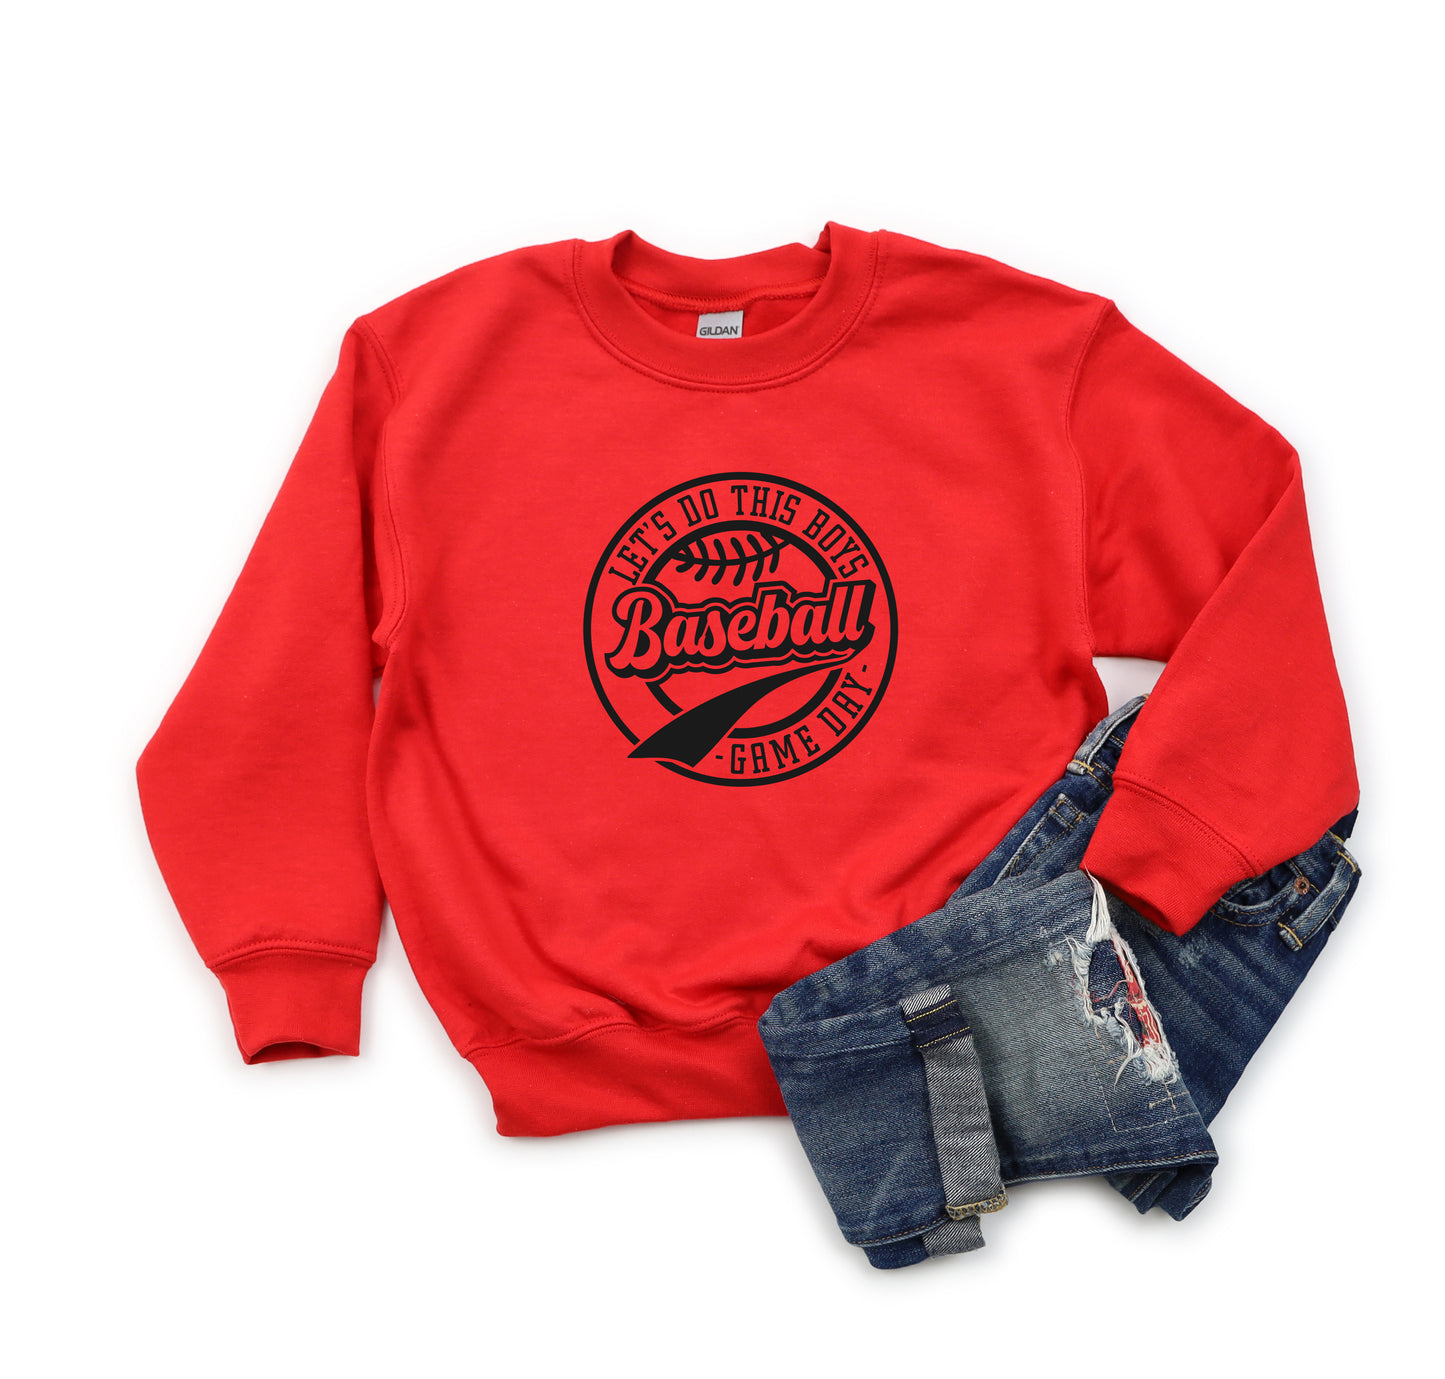 Let's Do This Boys Game Day | Youth Sweatshirt